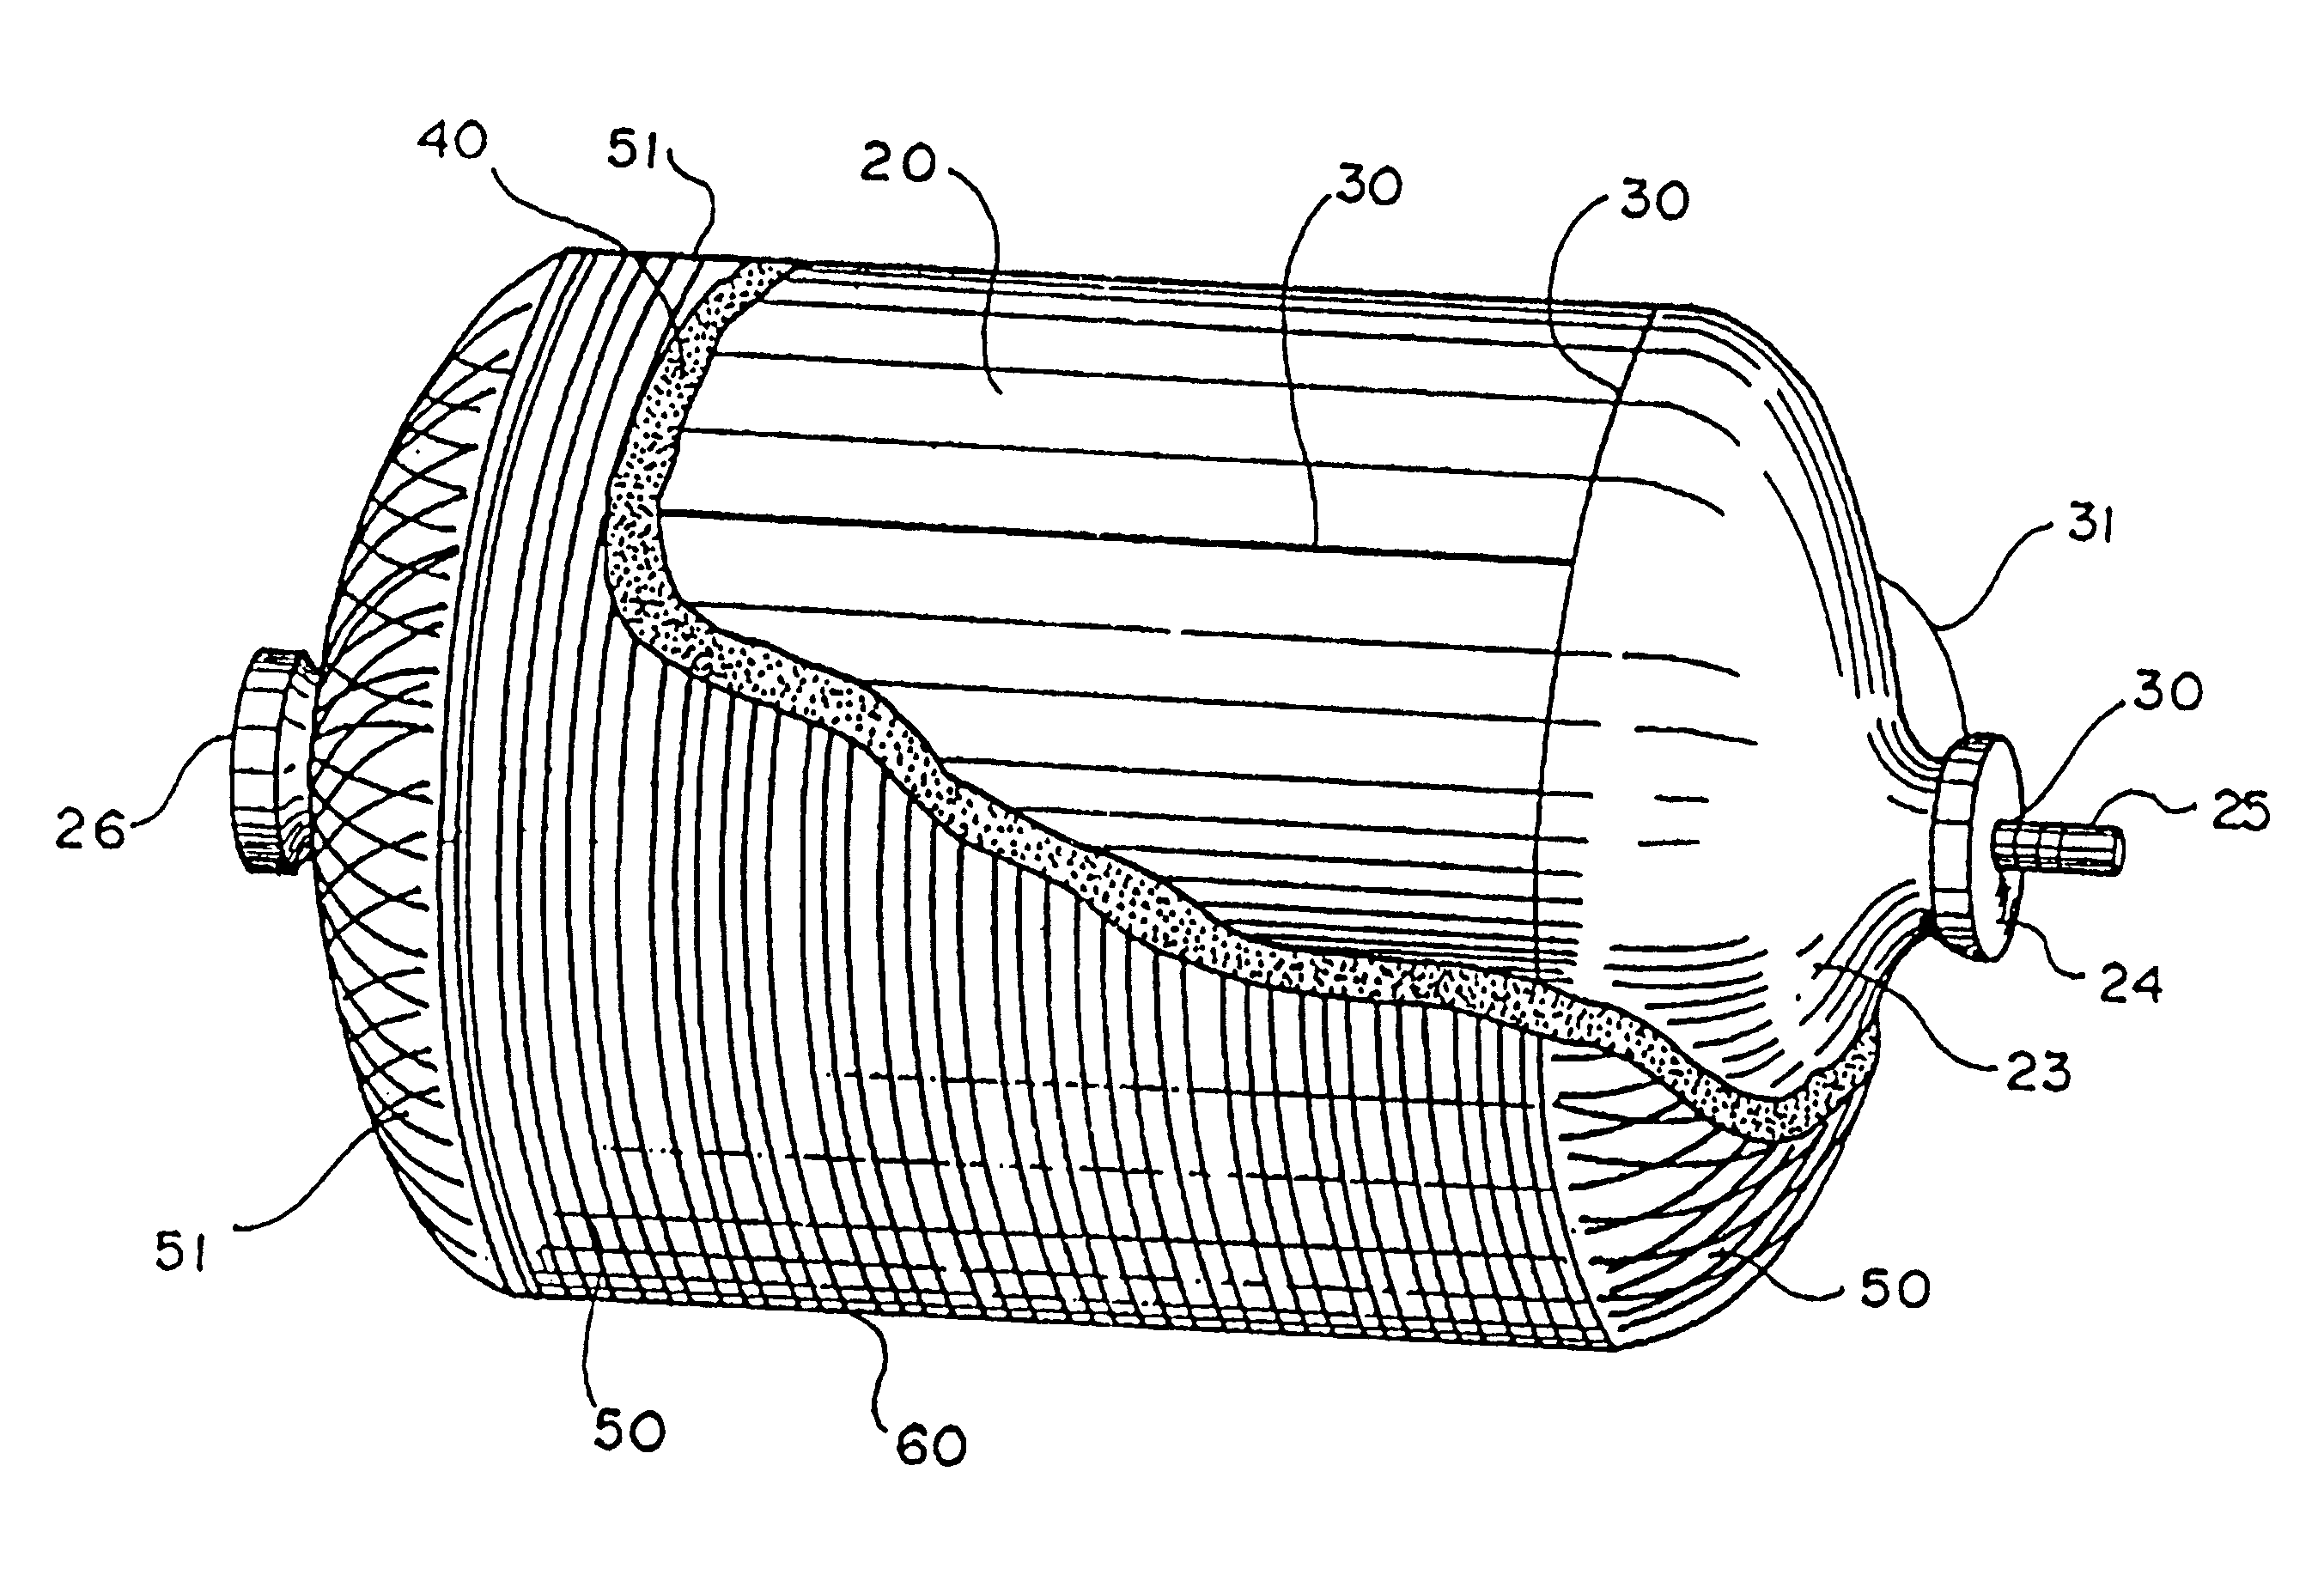 High performance, thin metal lined, composite overwrapped pressure vessel